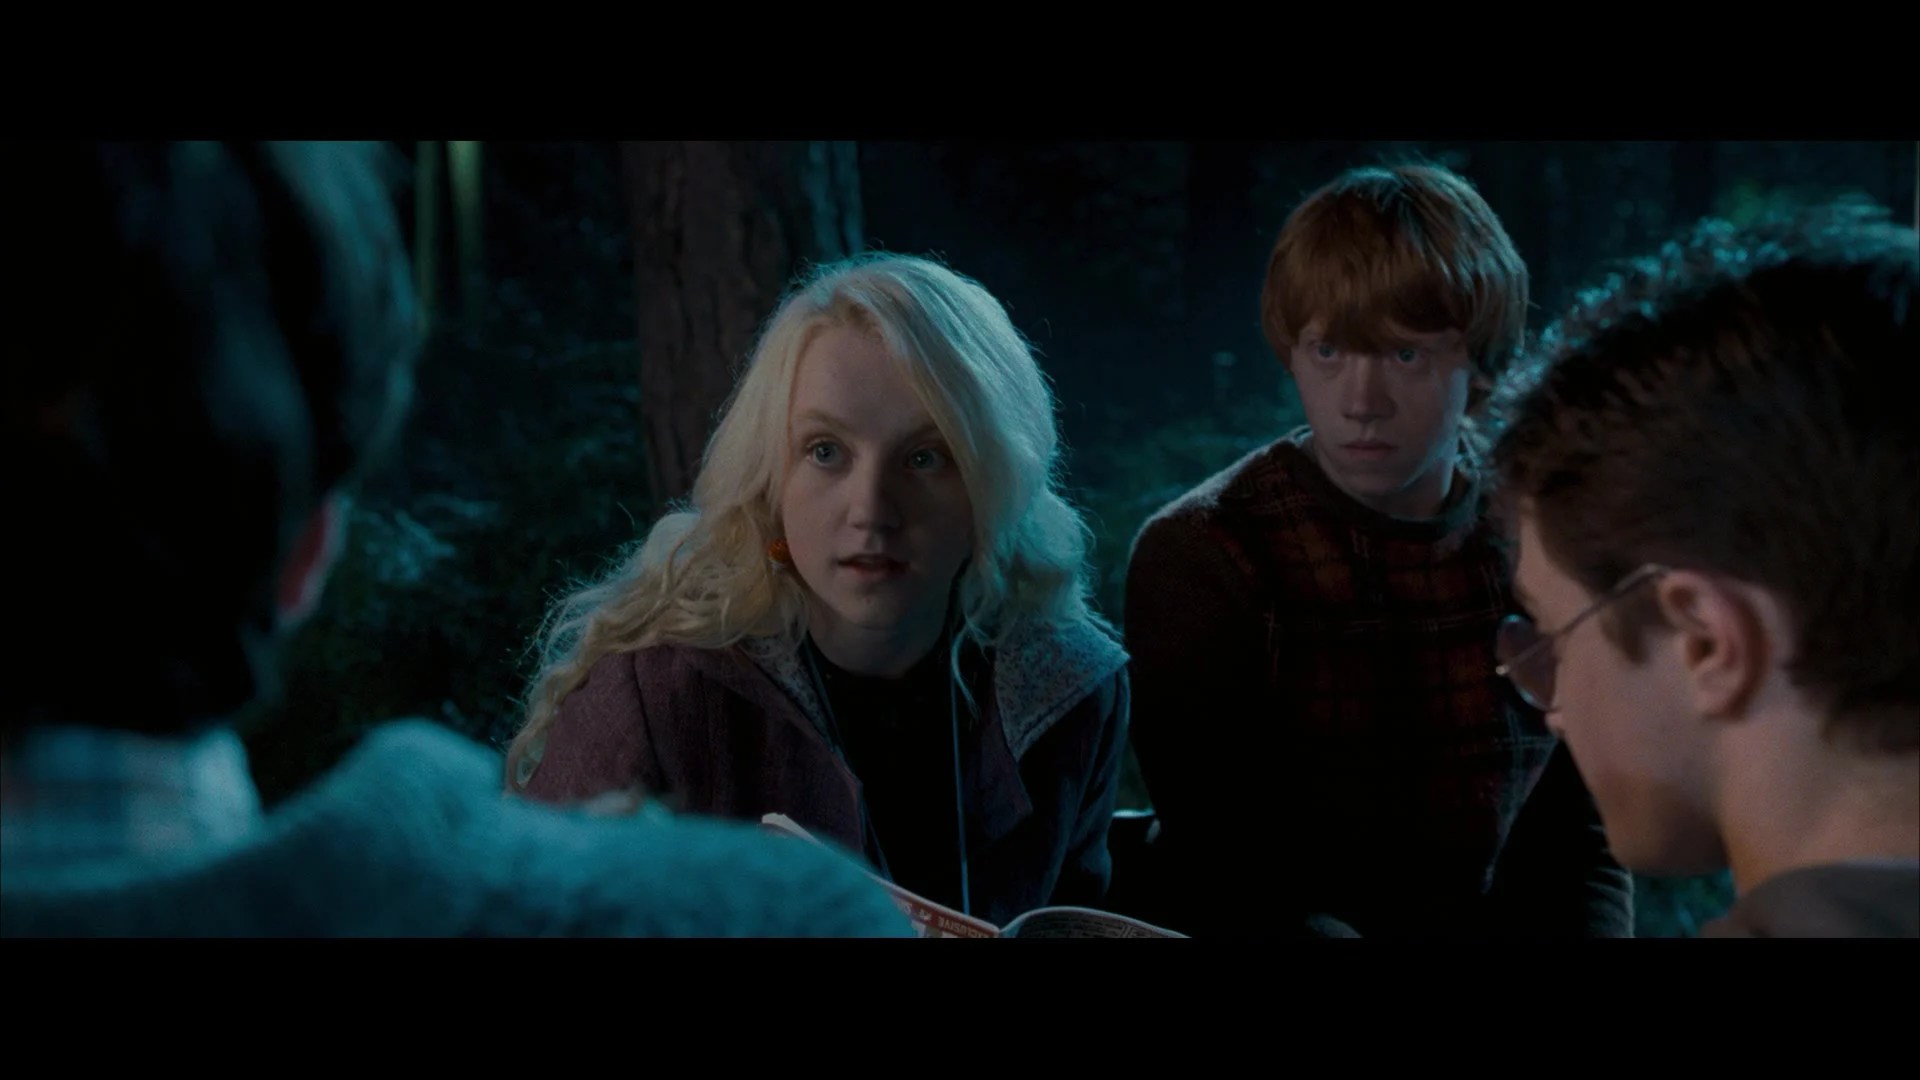 Harry Potter (Daniel Radcliffe), Ron Weasley (Rupert Grint) and Neville Longbottom (Matthew Lewis) meet Luna Lovegood (Evanna Lynch) for the first time in Harry Potter and the Order of the Phoenix (2007), Warner Bros. Pictures